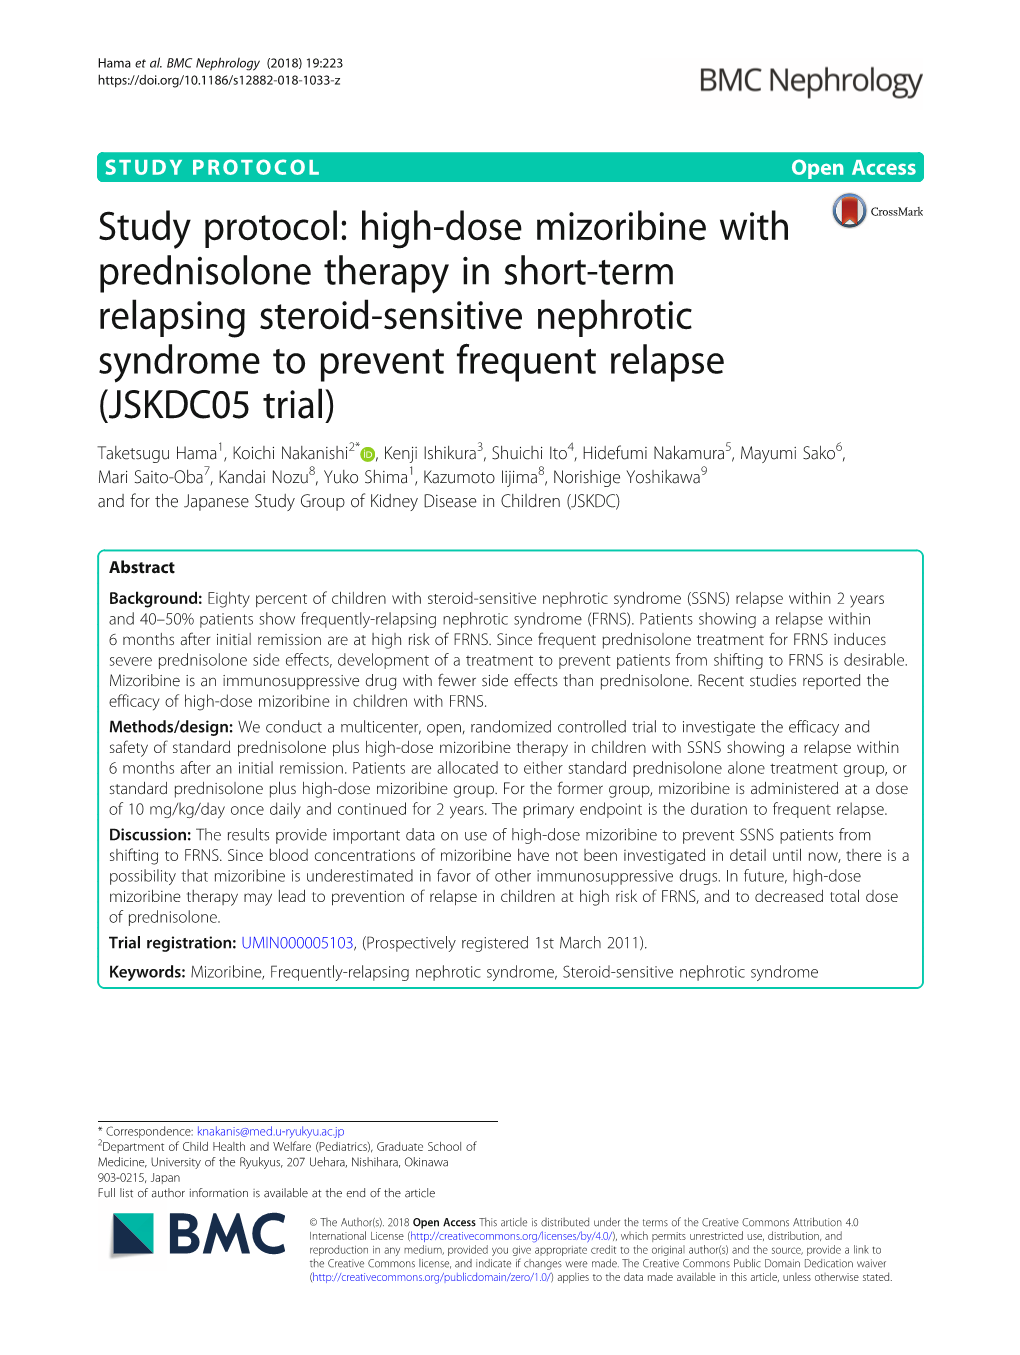 High-Dose Mizoribine with Prednisolone Therapy in Short-Term Relapsing Steroid-Sensitive Nephrotic Syndrome to P